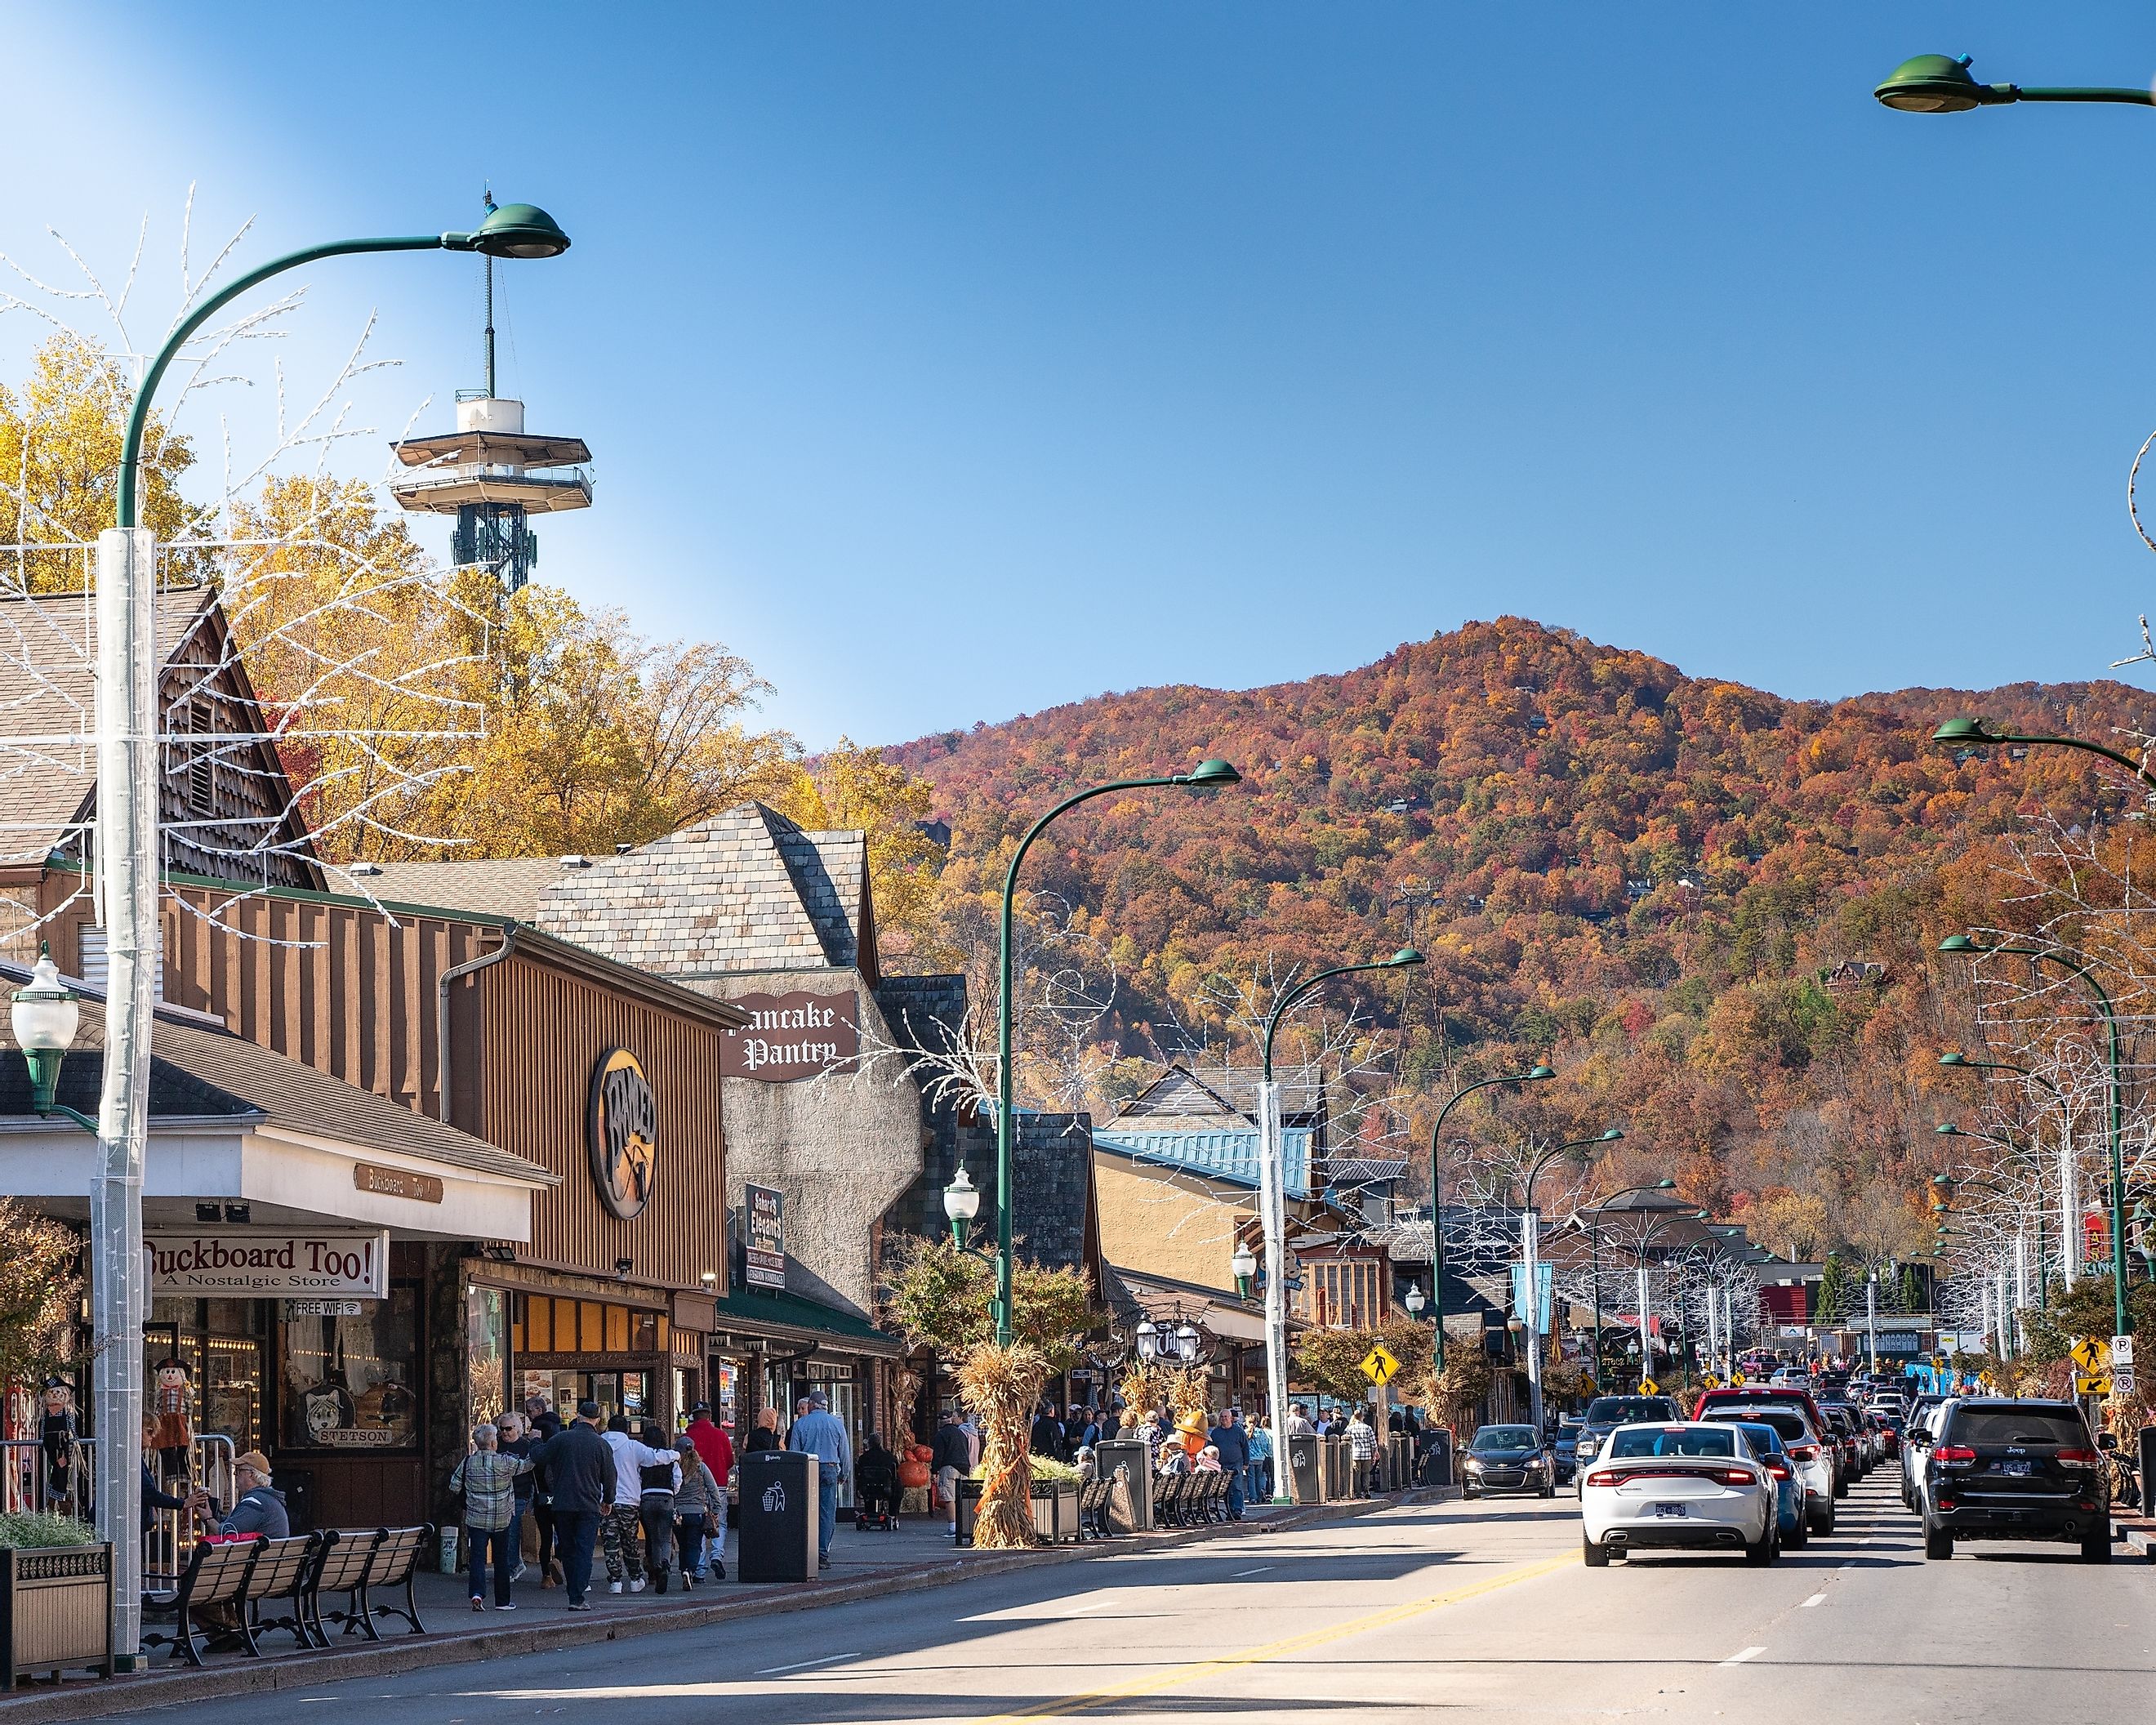 Gatlinburg, Tennessee - October 27, 2022: Street view of popular tourist city of Gatlinburg Tennessee in the Smoky Mountains with attractions in view